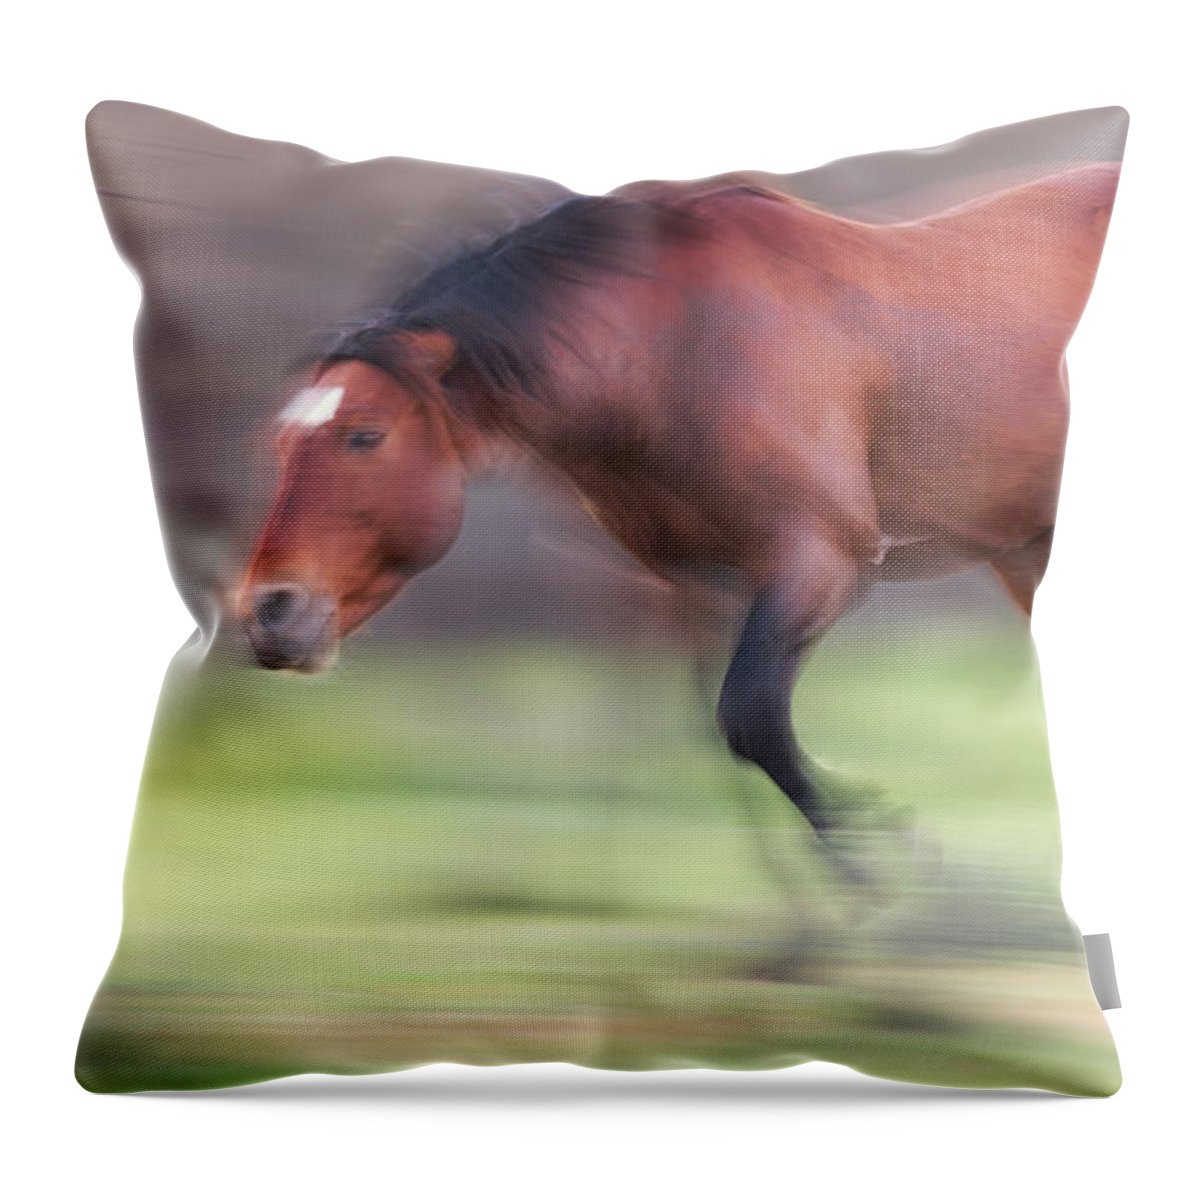 Action Throw Pillow featuring the photograph Motion by Shannon Hastings